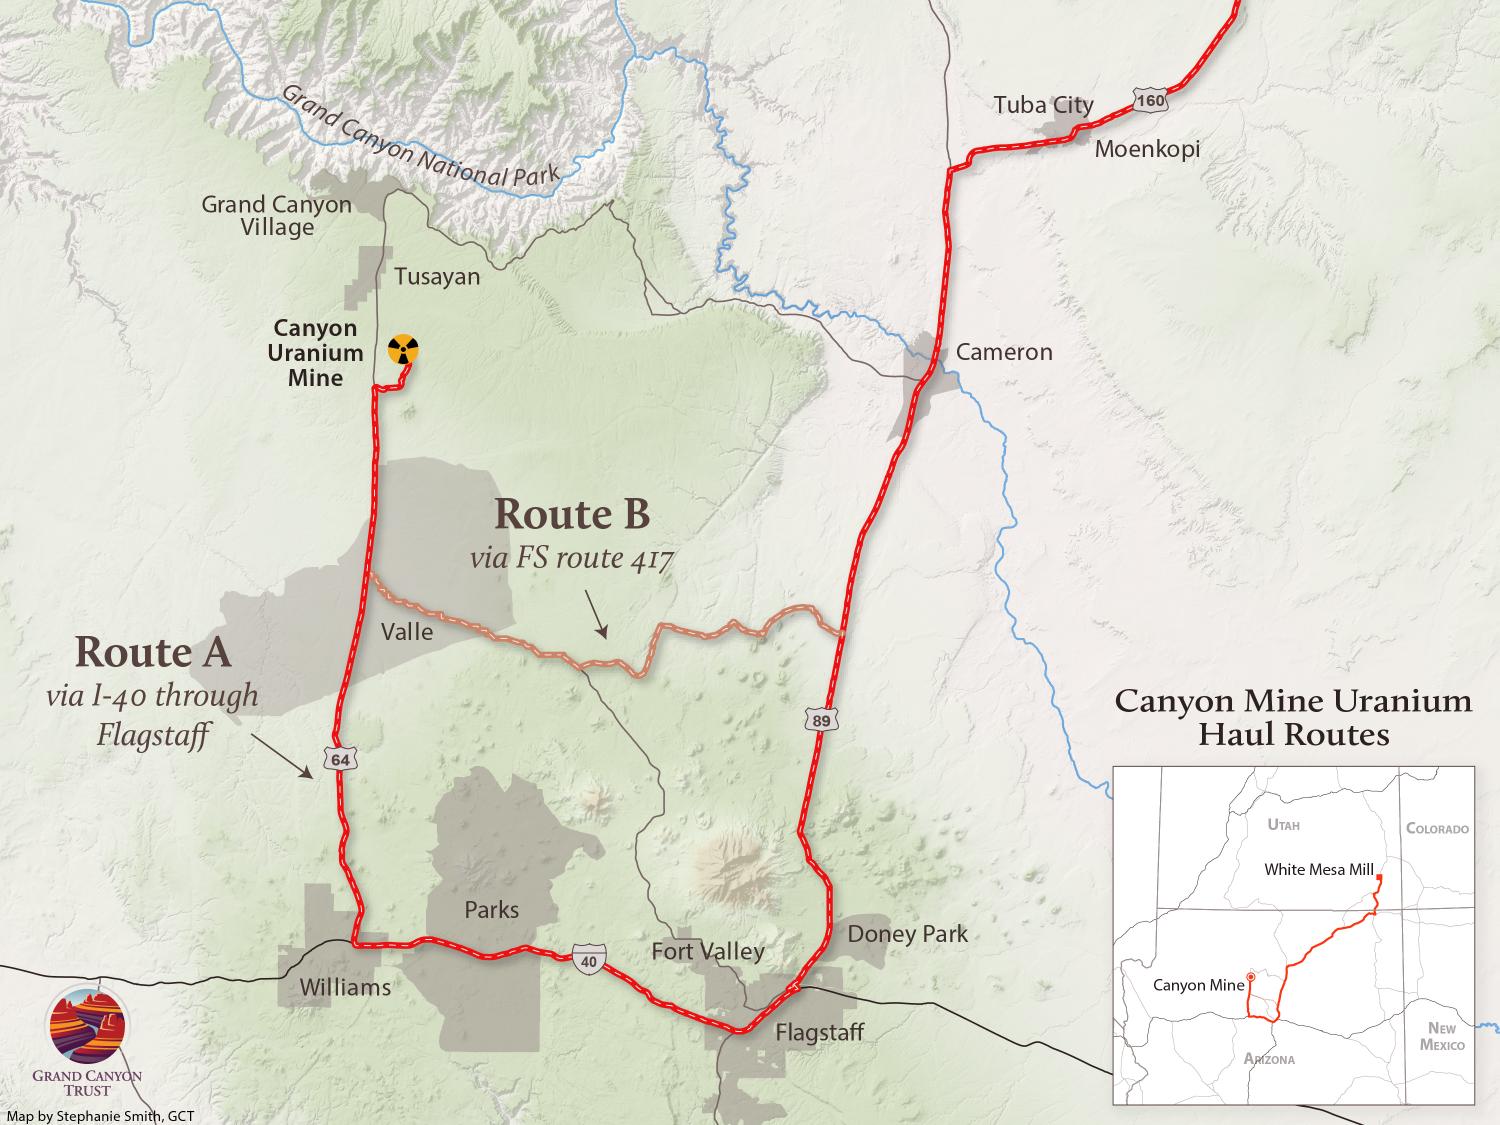 Map of Canyon Mine's haul routes